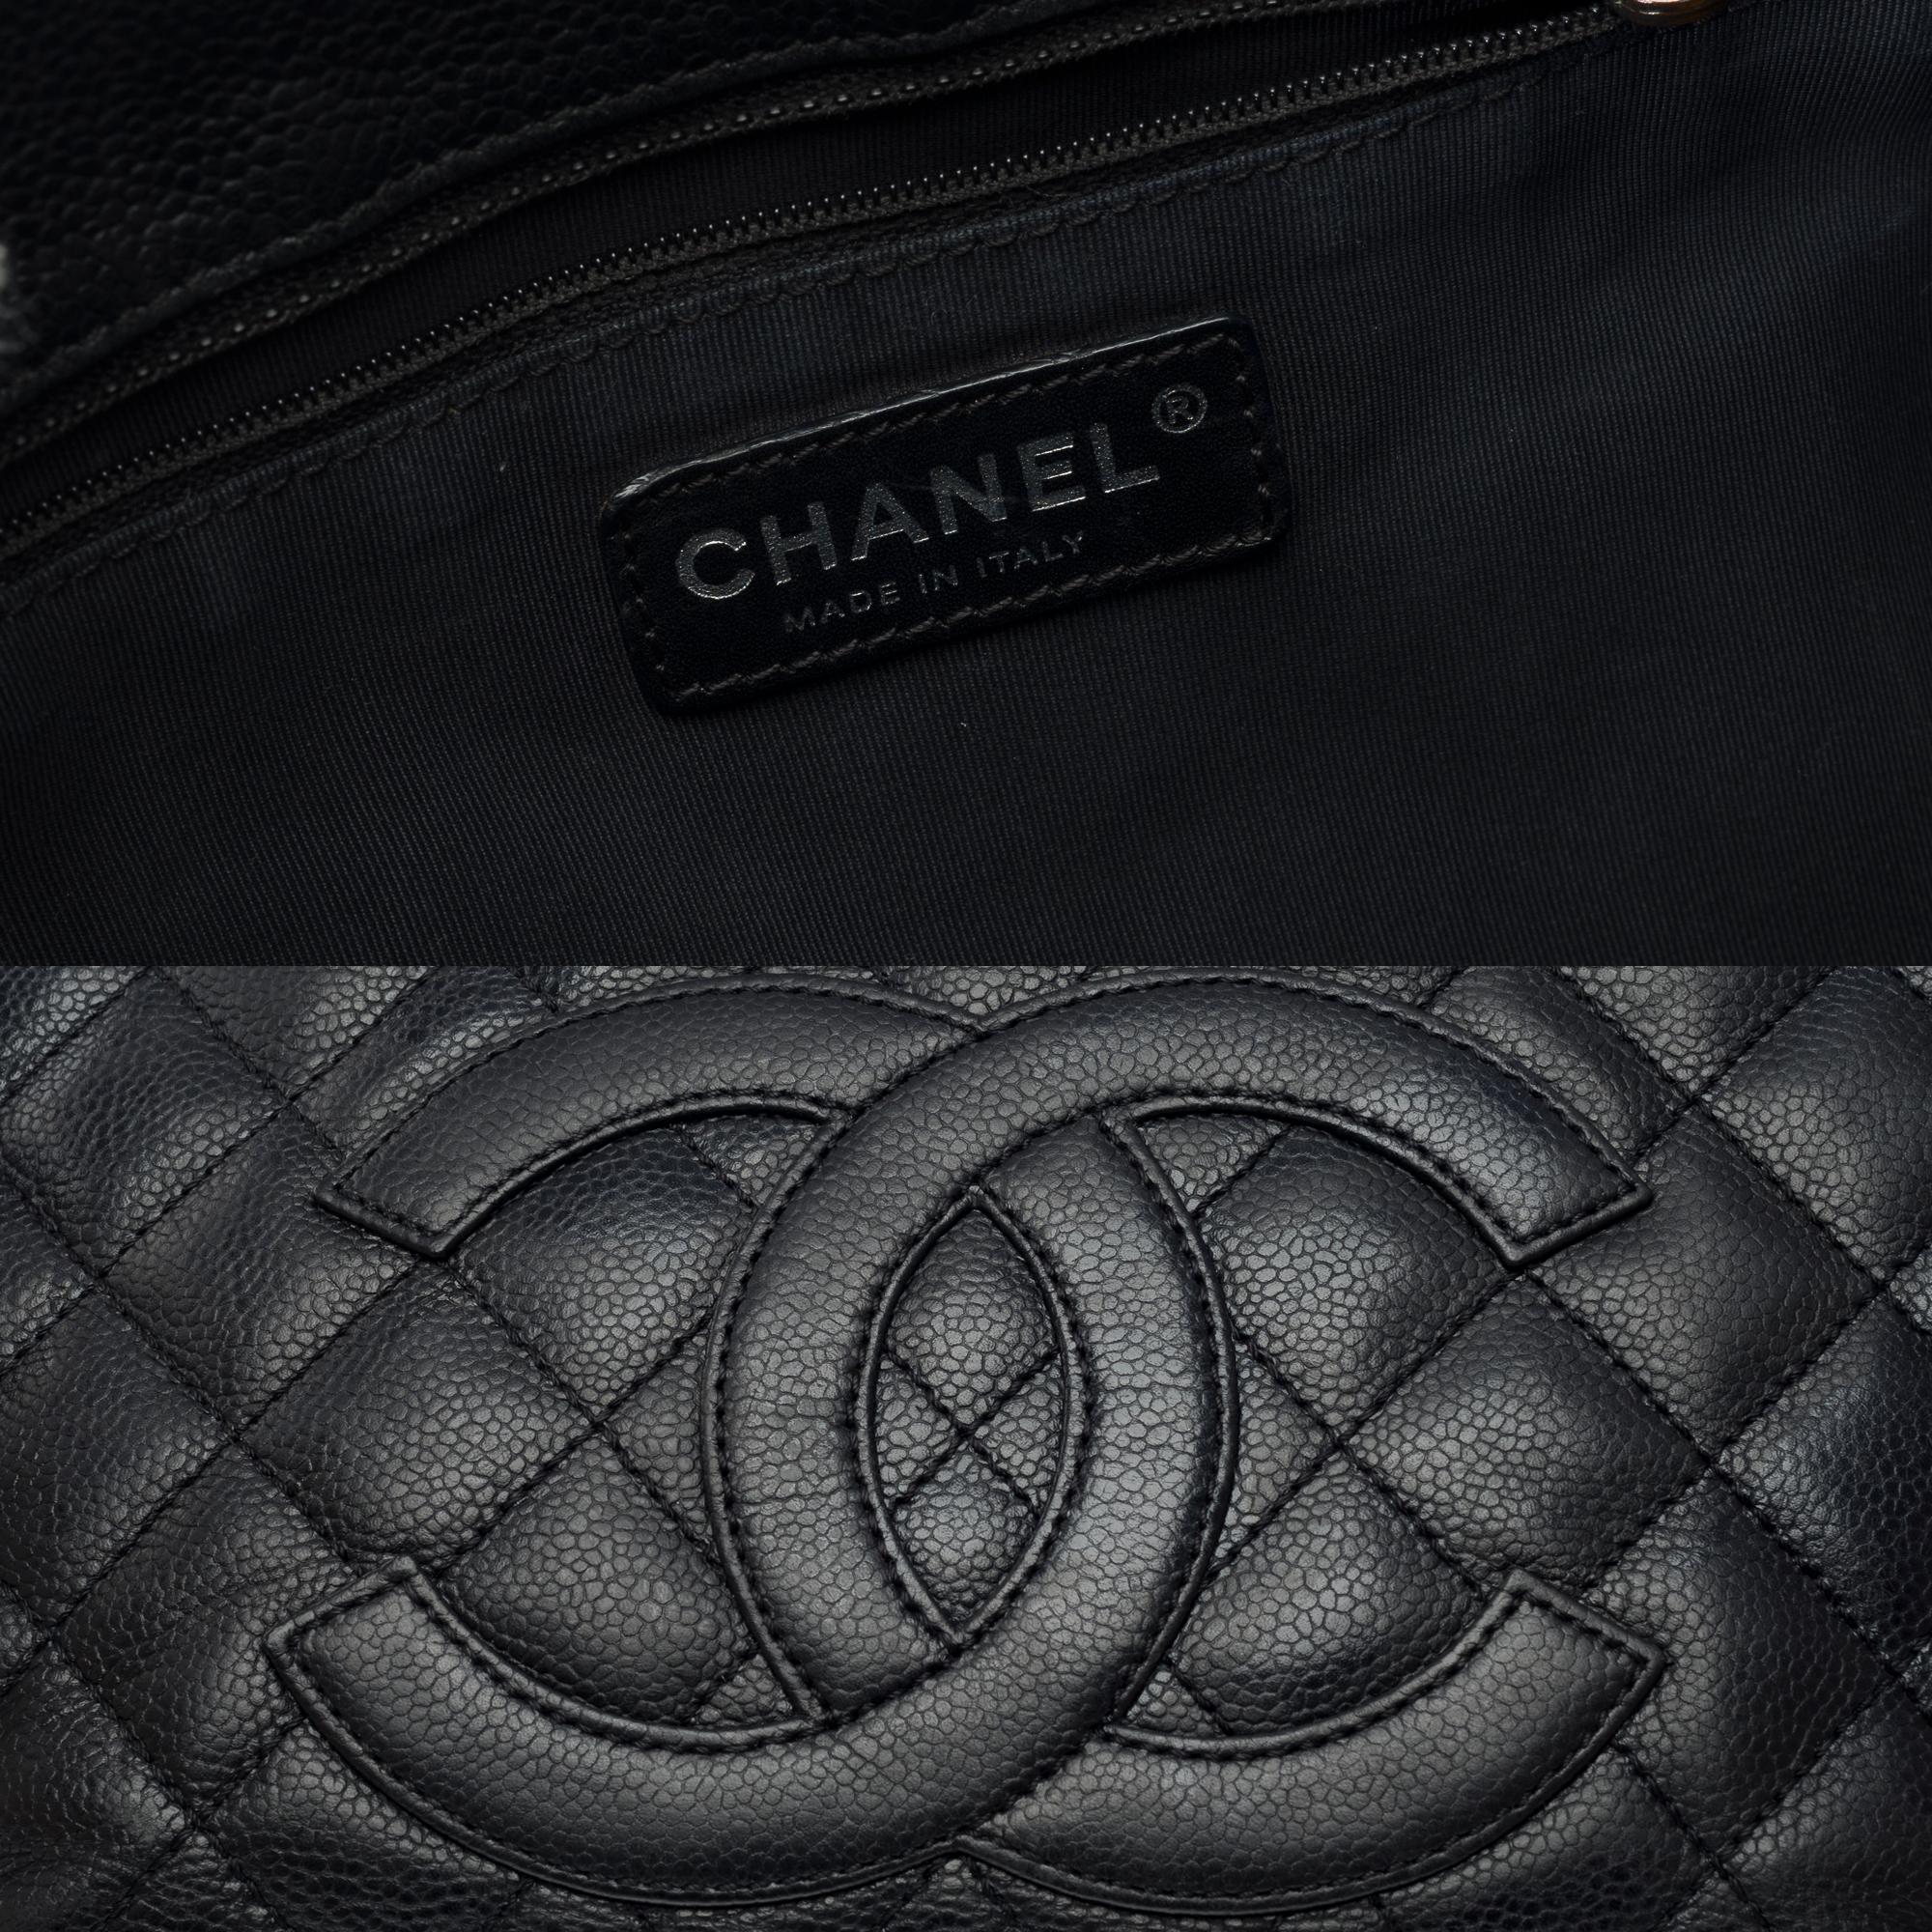  Chanel Grand Shopping Tote bag (GST) in black Caviar quilted leather, SHW For Sale 2